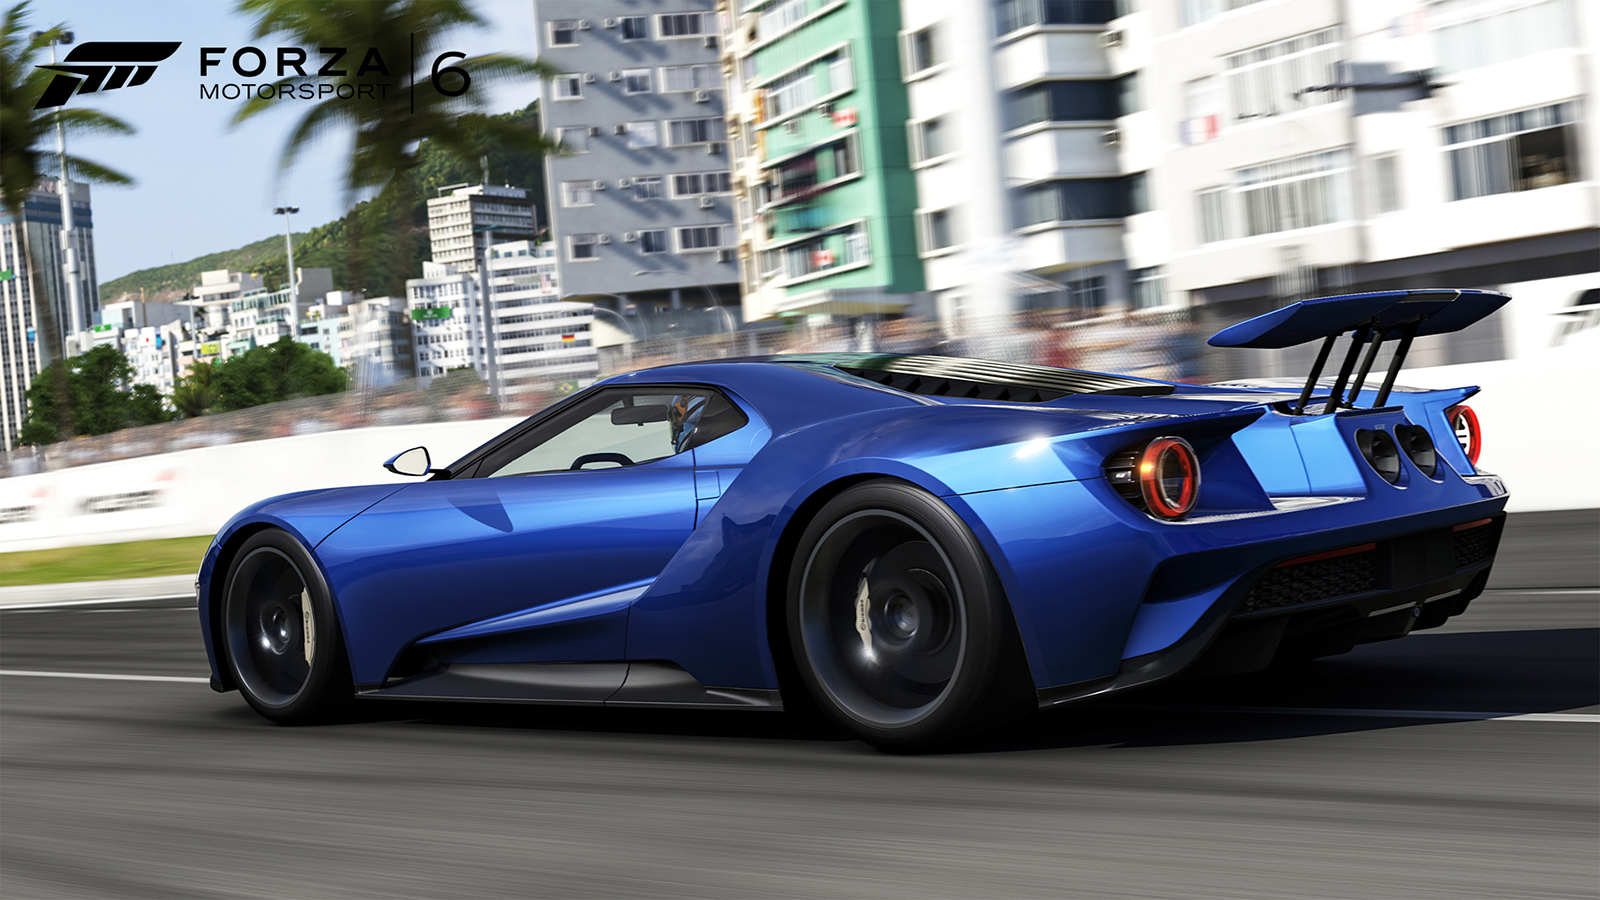 Forza Motorsport 6: Apex will be the free to play, PC version of  Microsoft's racer